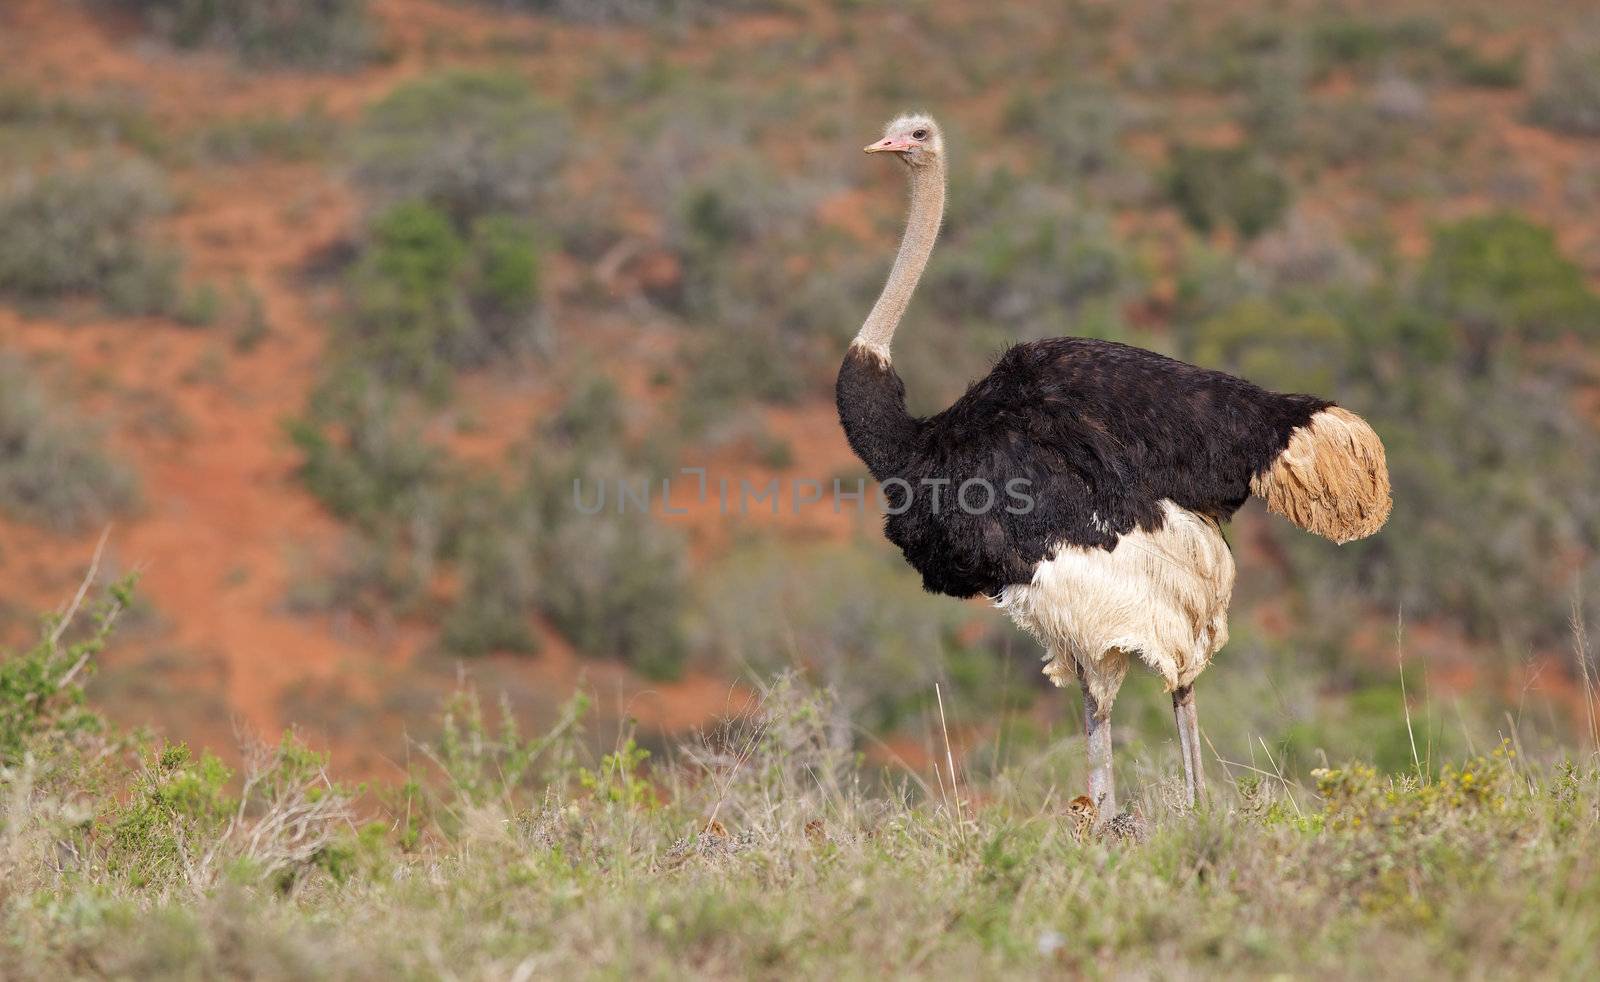 A male ostrich (Struthio camelus) with chicks at his feet, Addo Elephant National Park, South Africa.